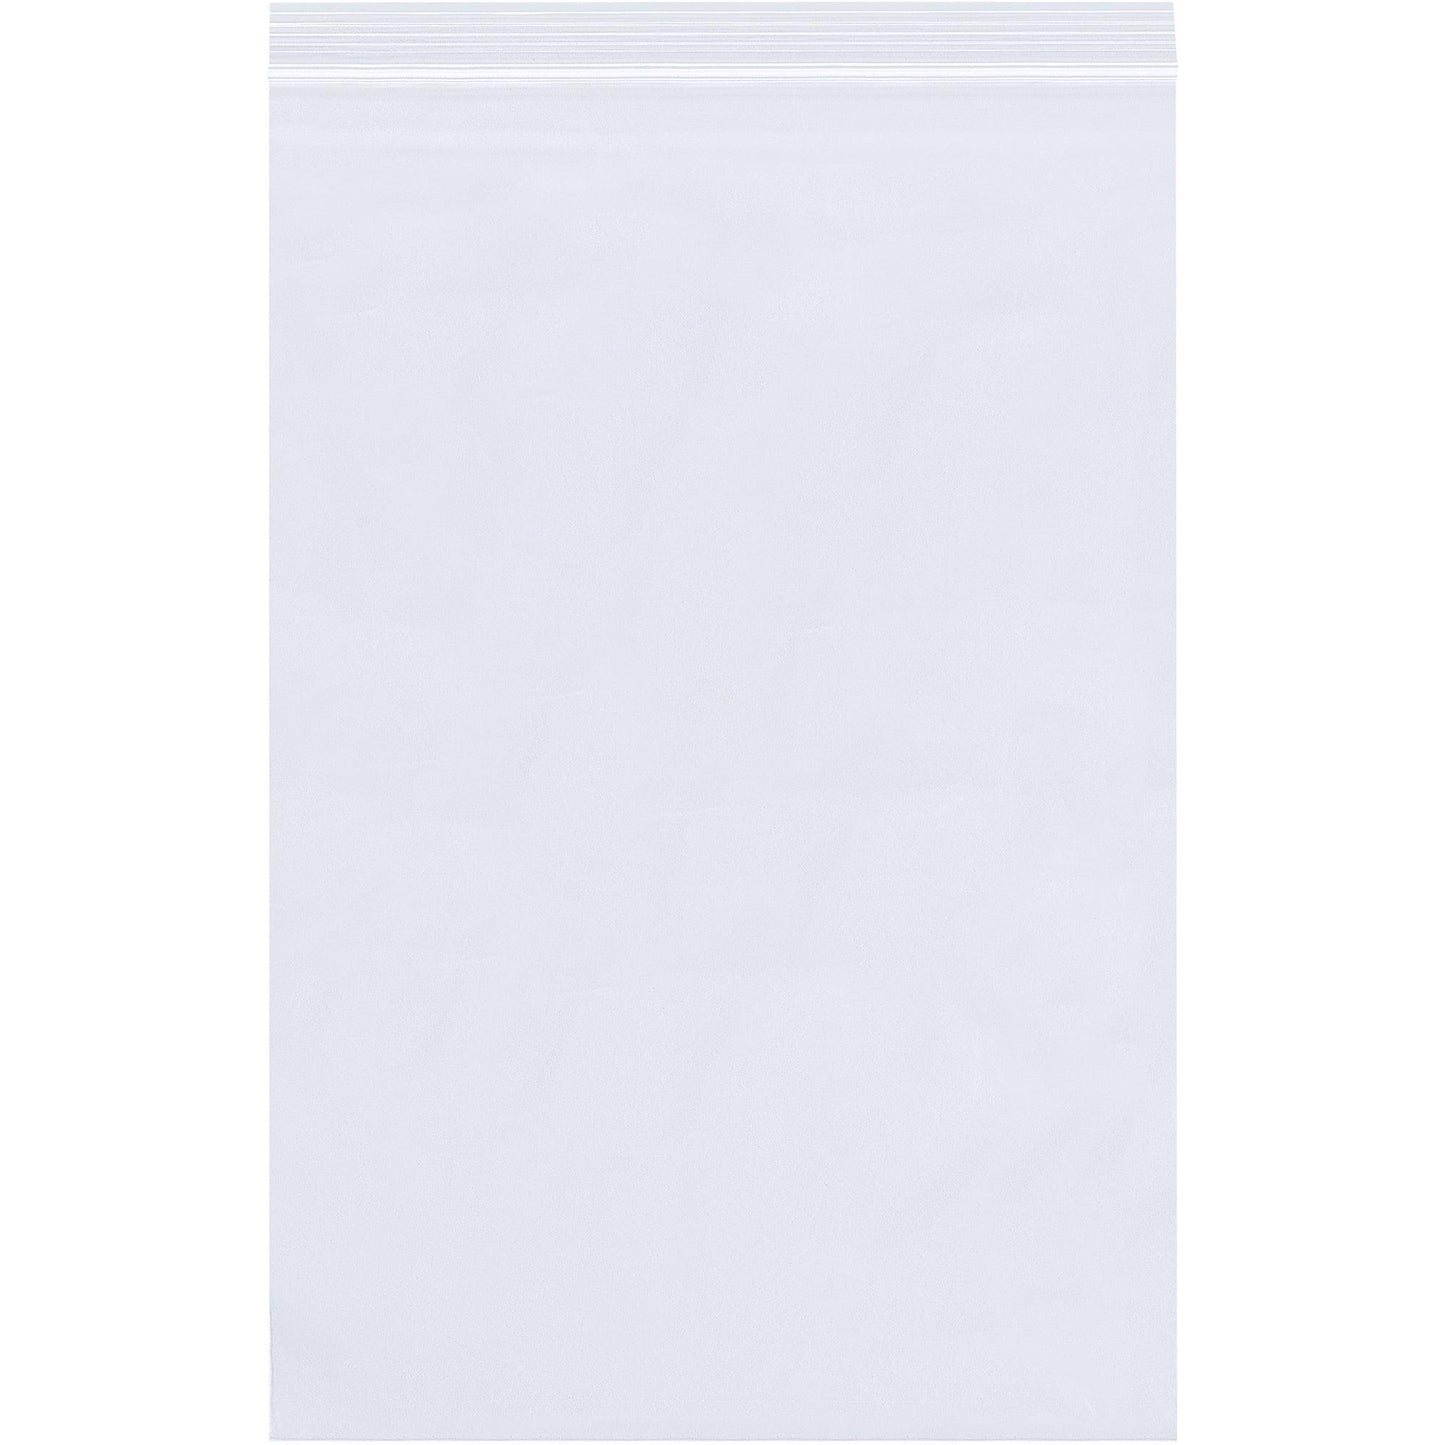 4 x 4" - 8 Mil Reclosable Poly Bags - PB3858